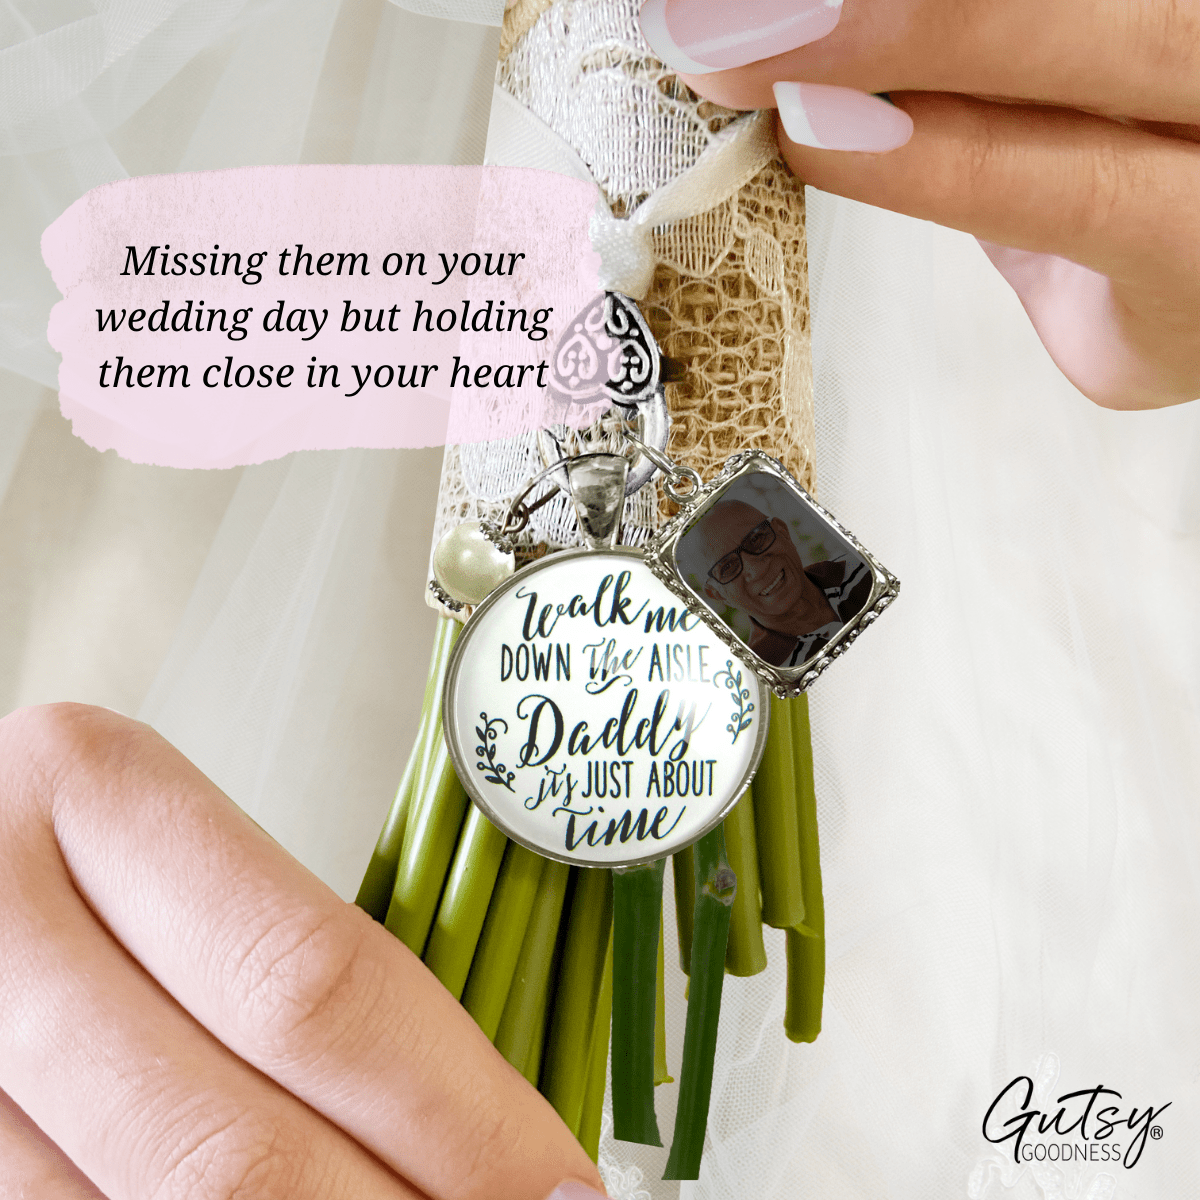 Wedding Bouquet Charm Walk Me Down Aisle Daddy Memorial Silver Tone Gift Photo Frame - Gutsy Goodness Handmade Jewelry Gifts